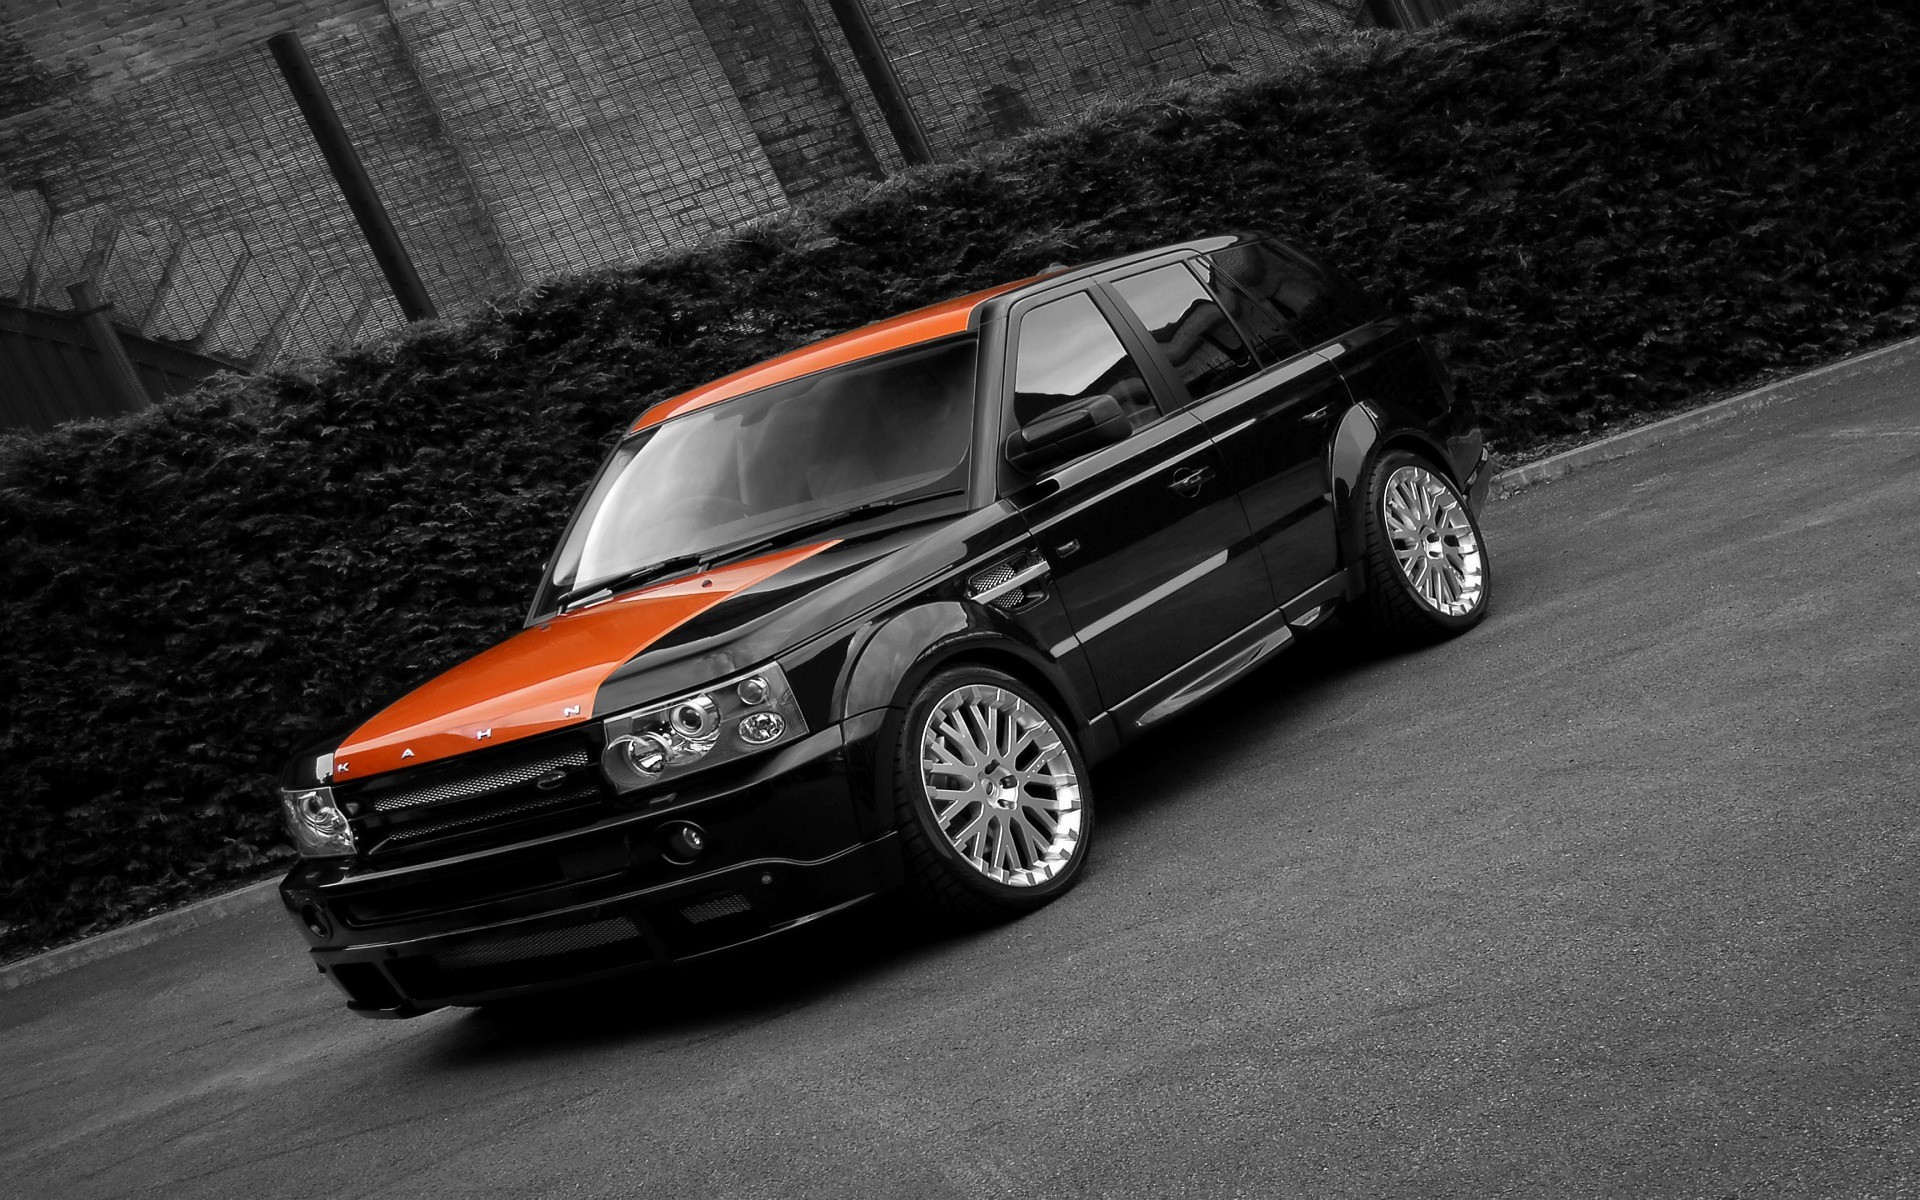 1920x1200 Pimped Range Rover Sport Wallpaper Range Rover Cars Wallpapers